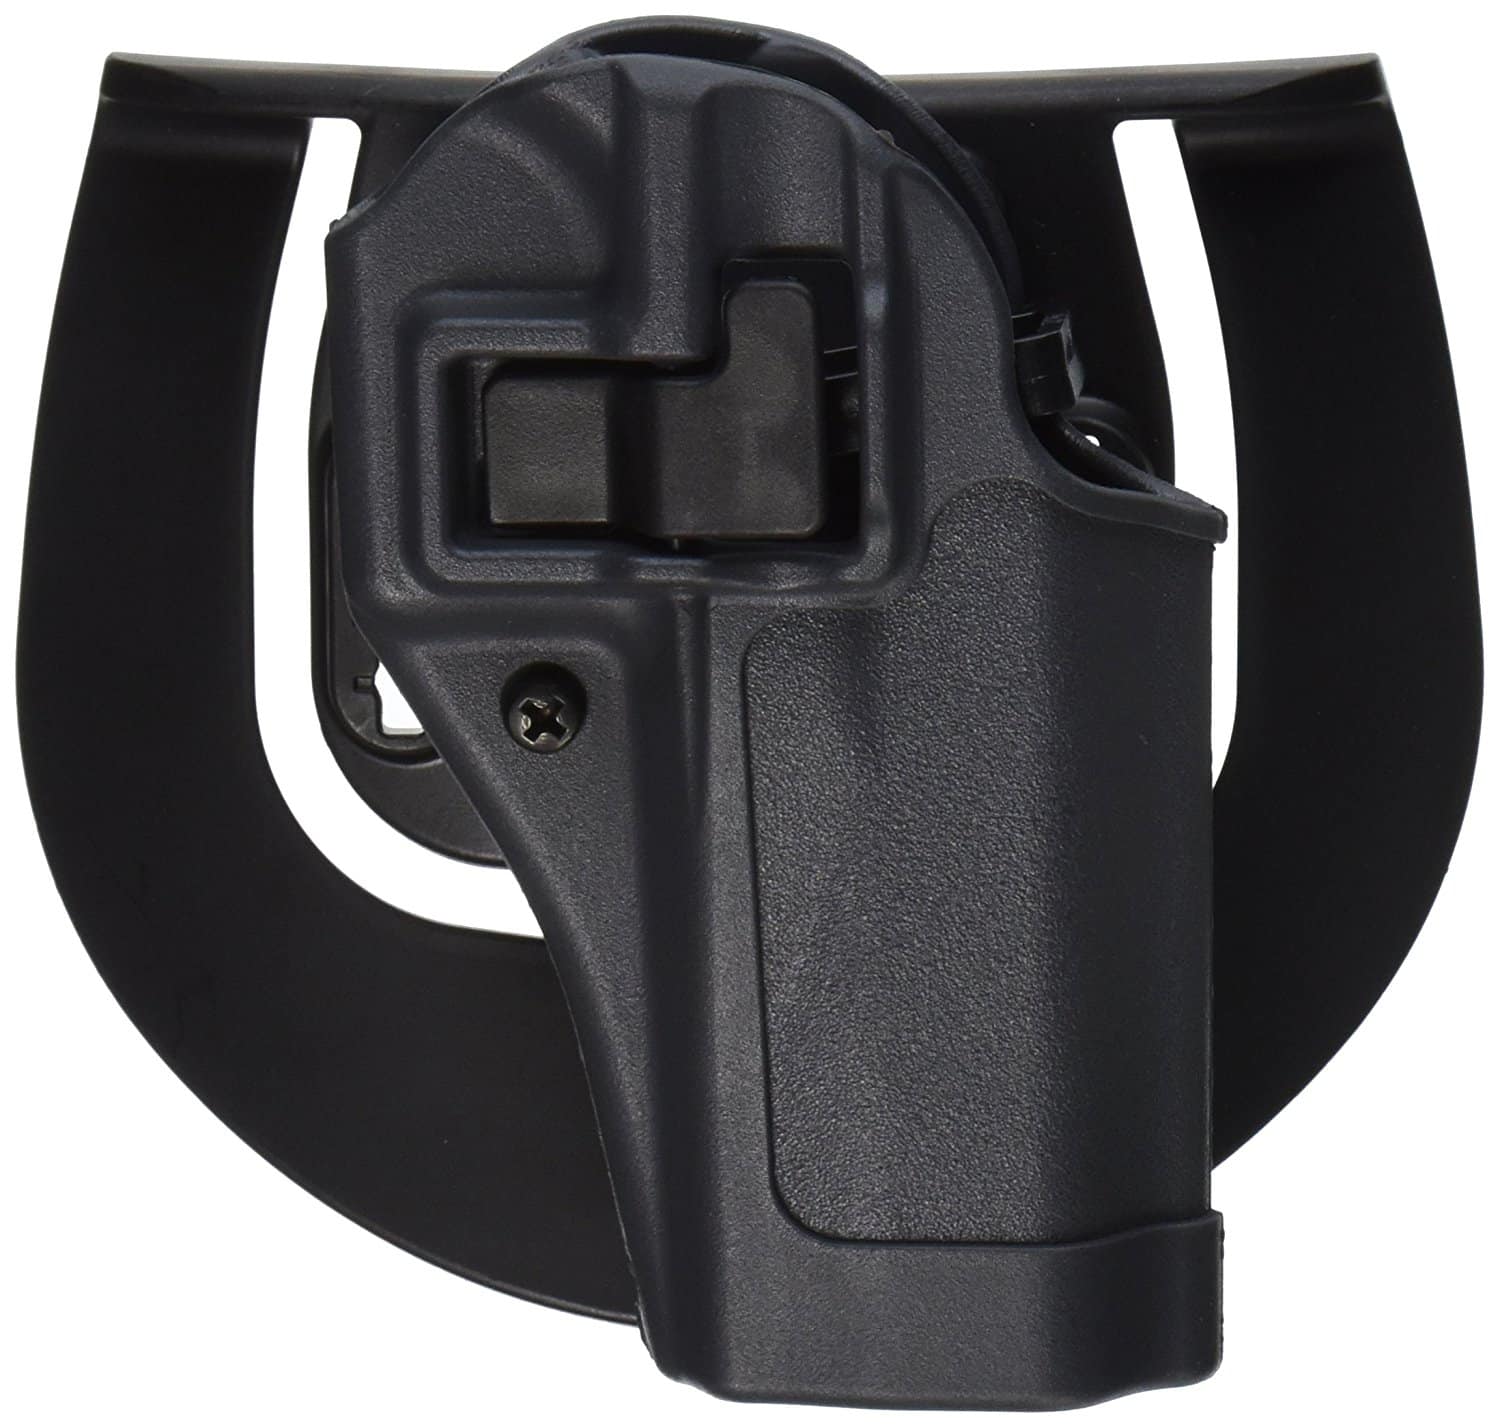  The BlackHawk Serpa Sportster Paddle Holster is for te Glock 20 and righthand